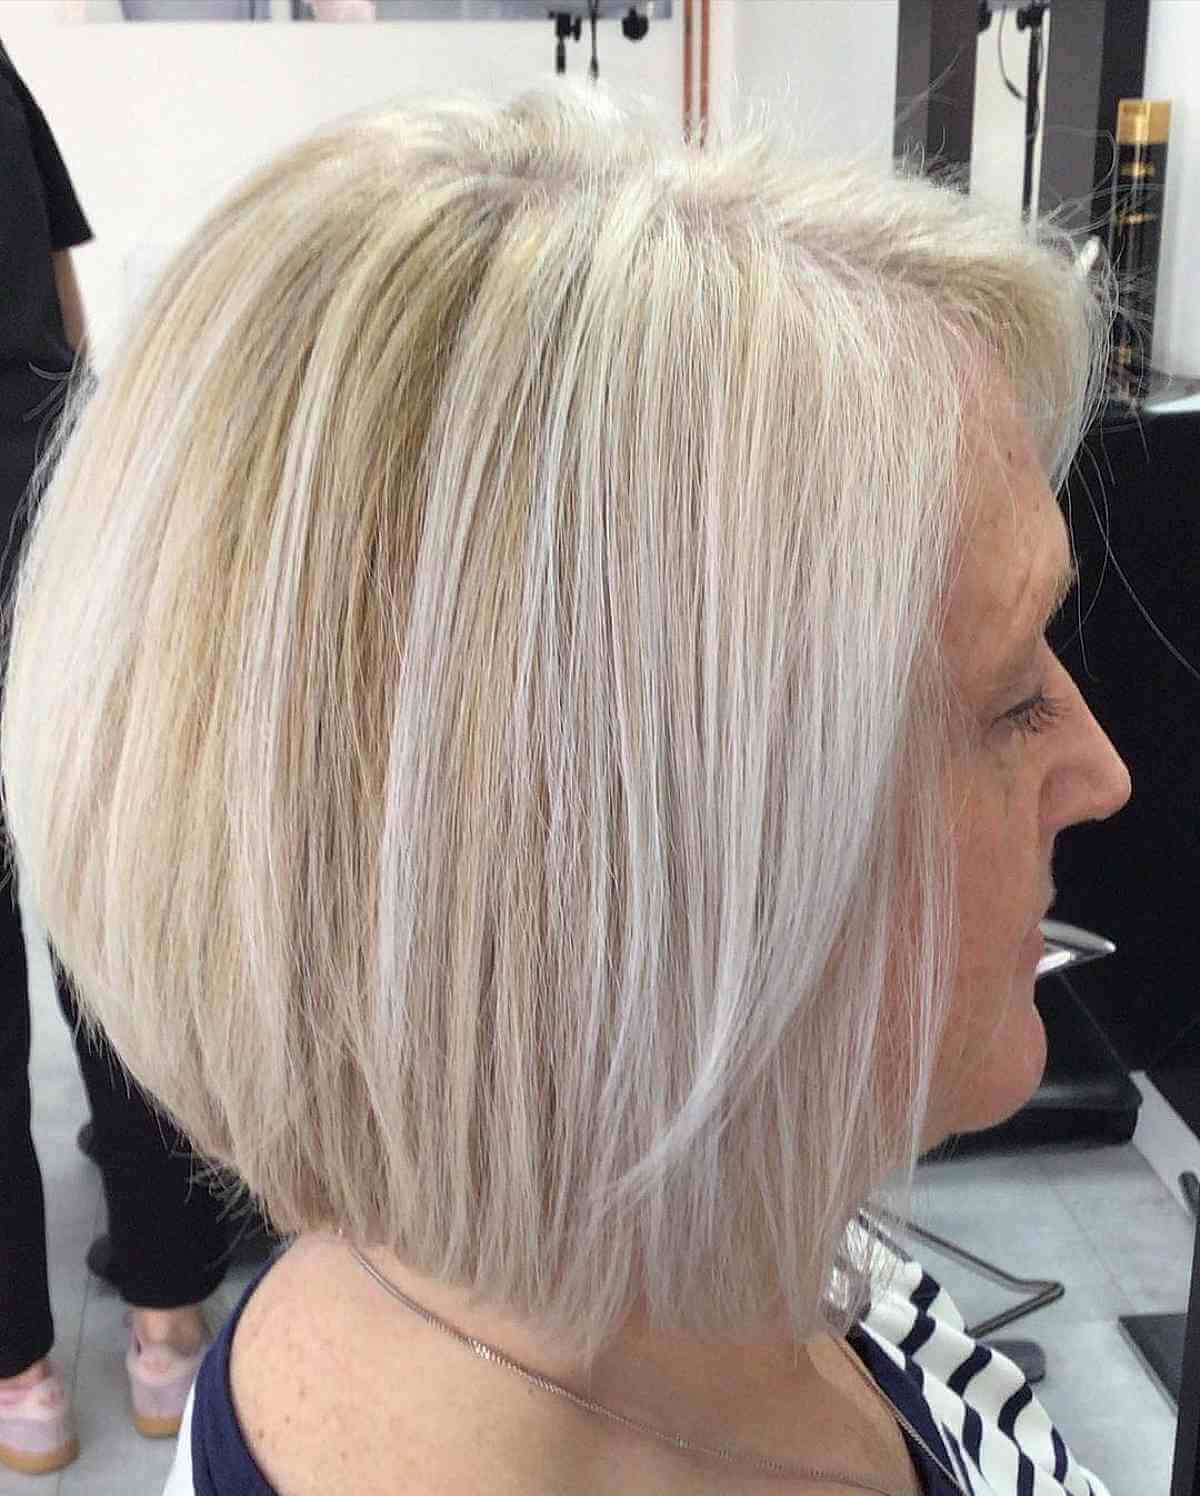 Neck-Length Angled Bob with Choppy Ends for 50-Year-Old Women